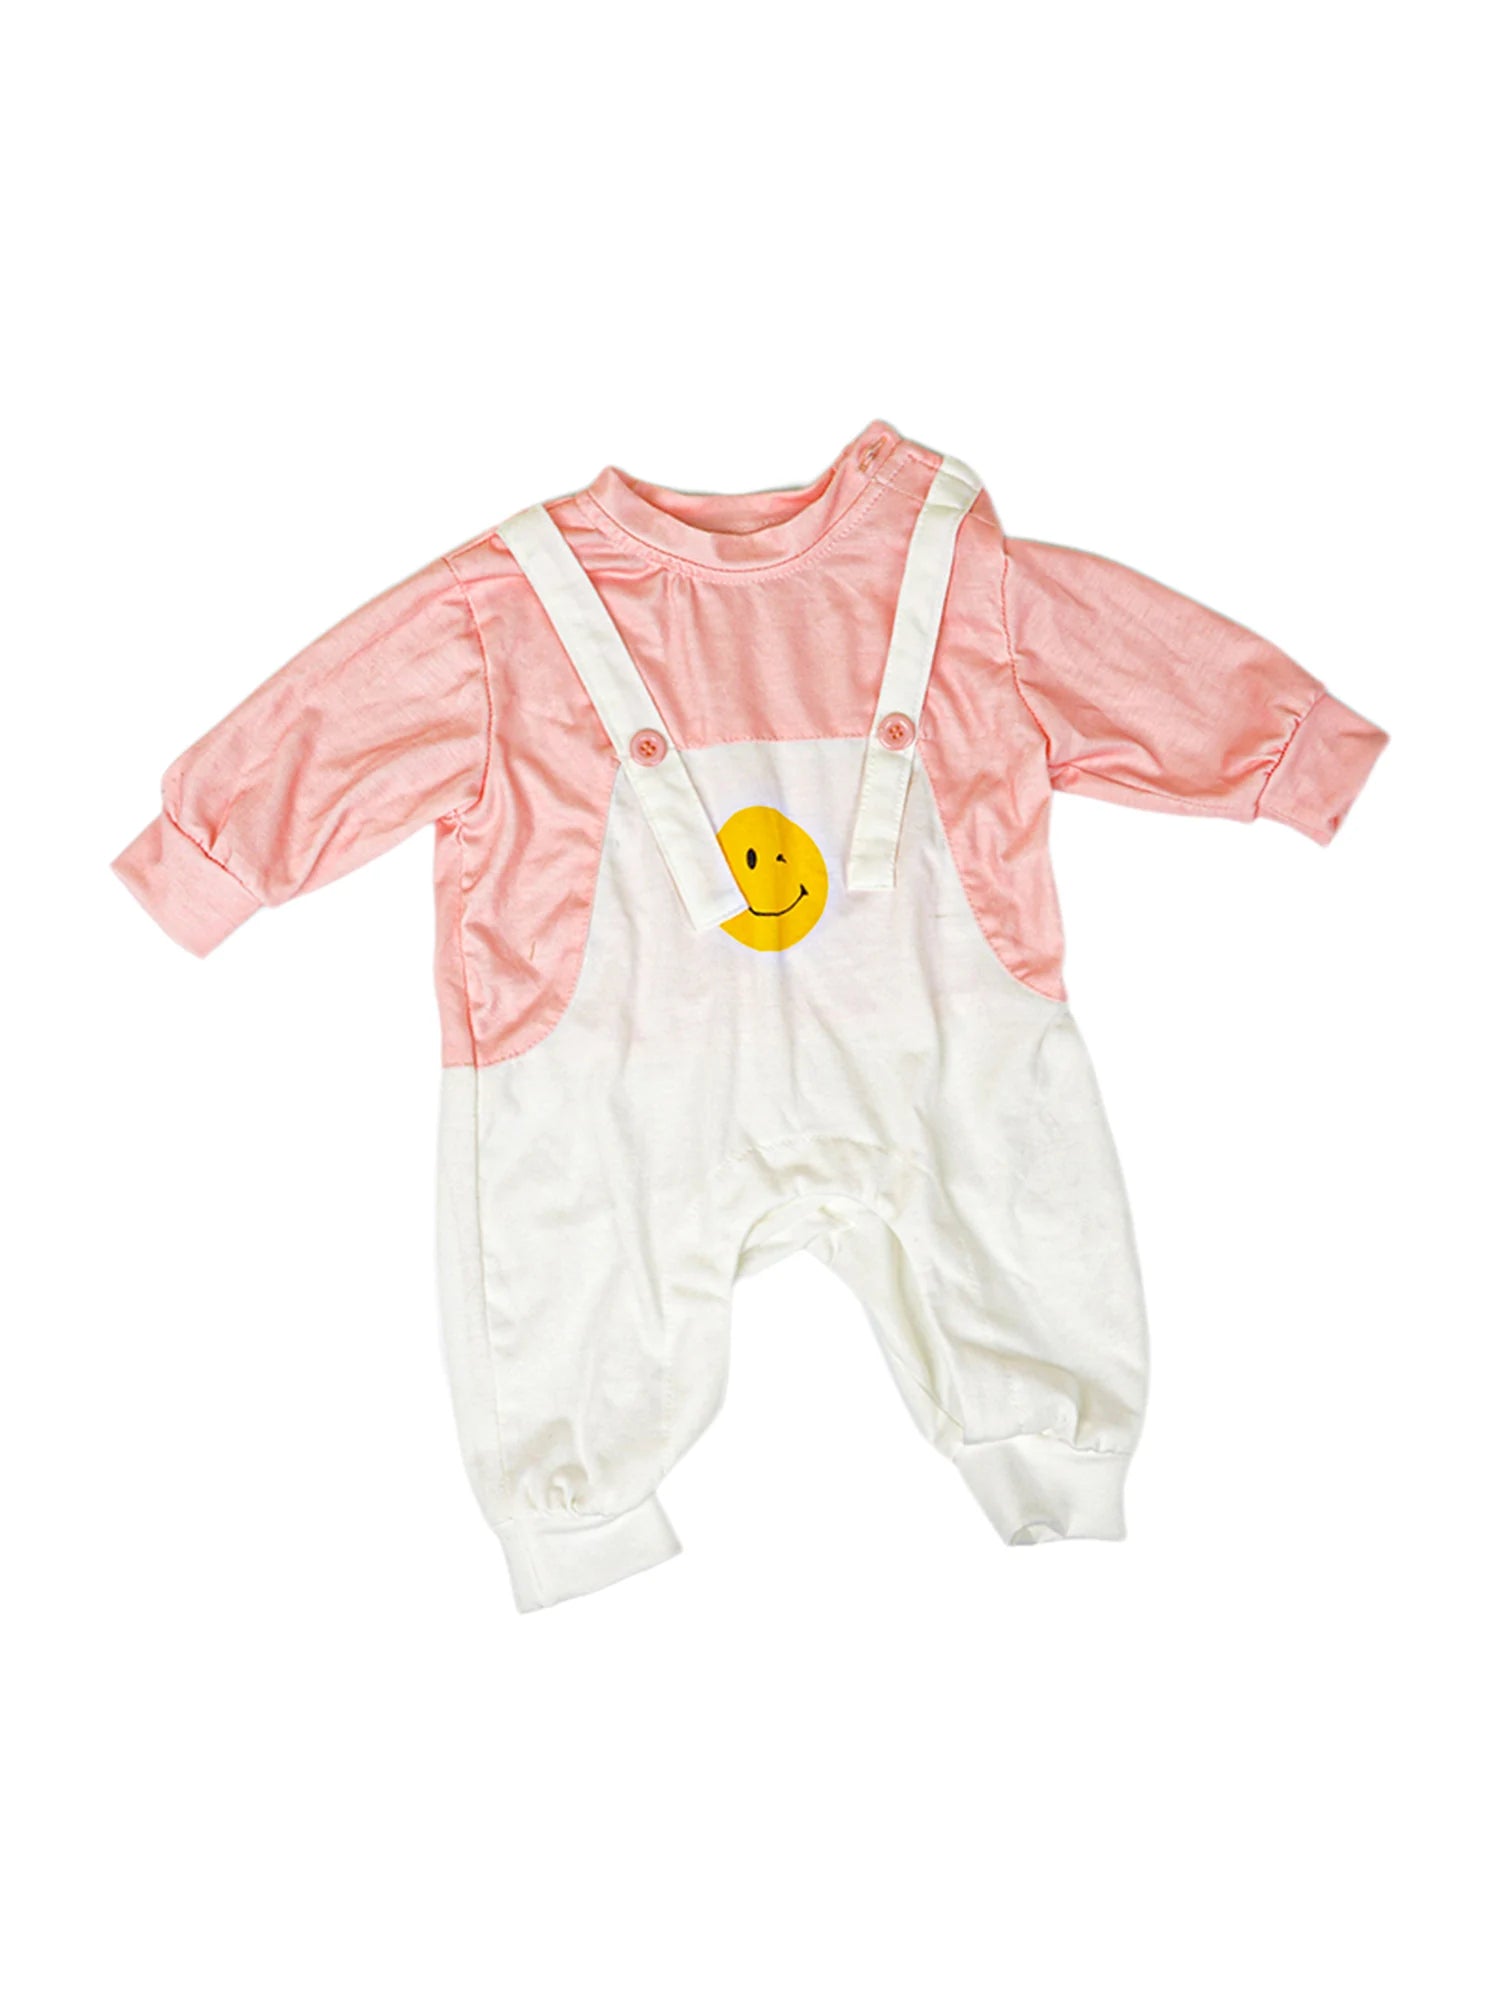 Cute Doll Overall Clothing